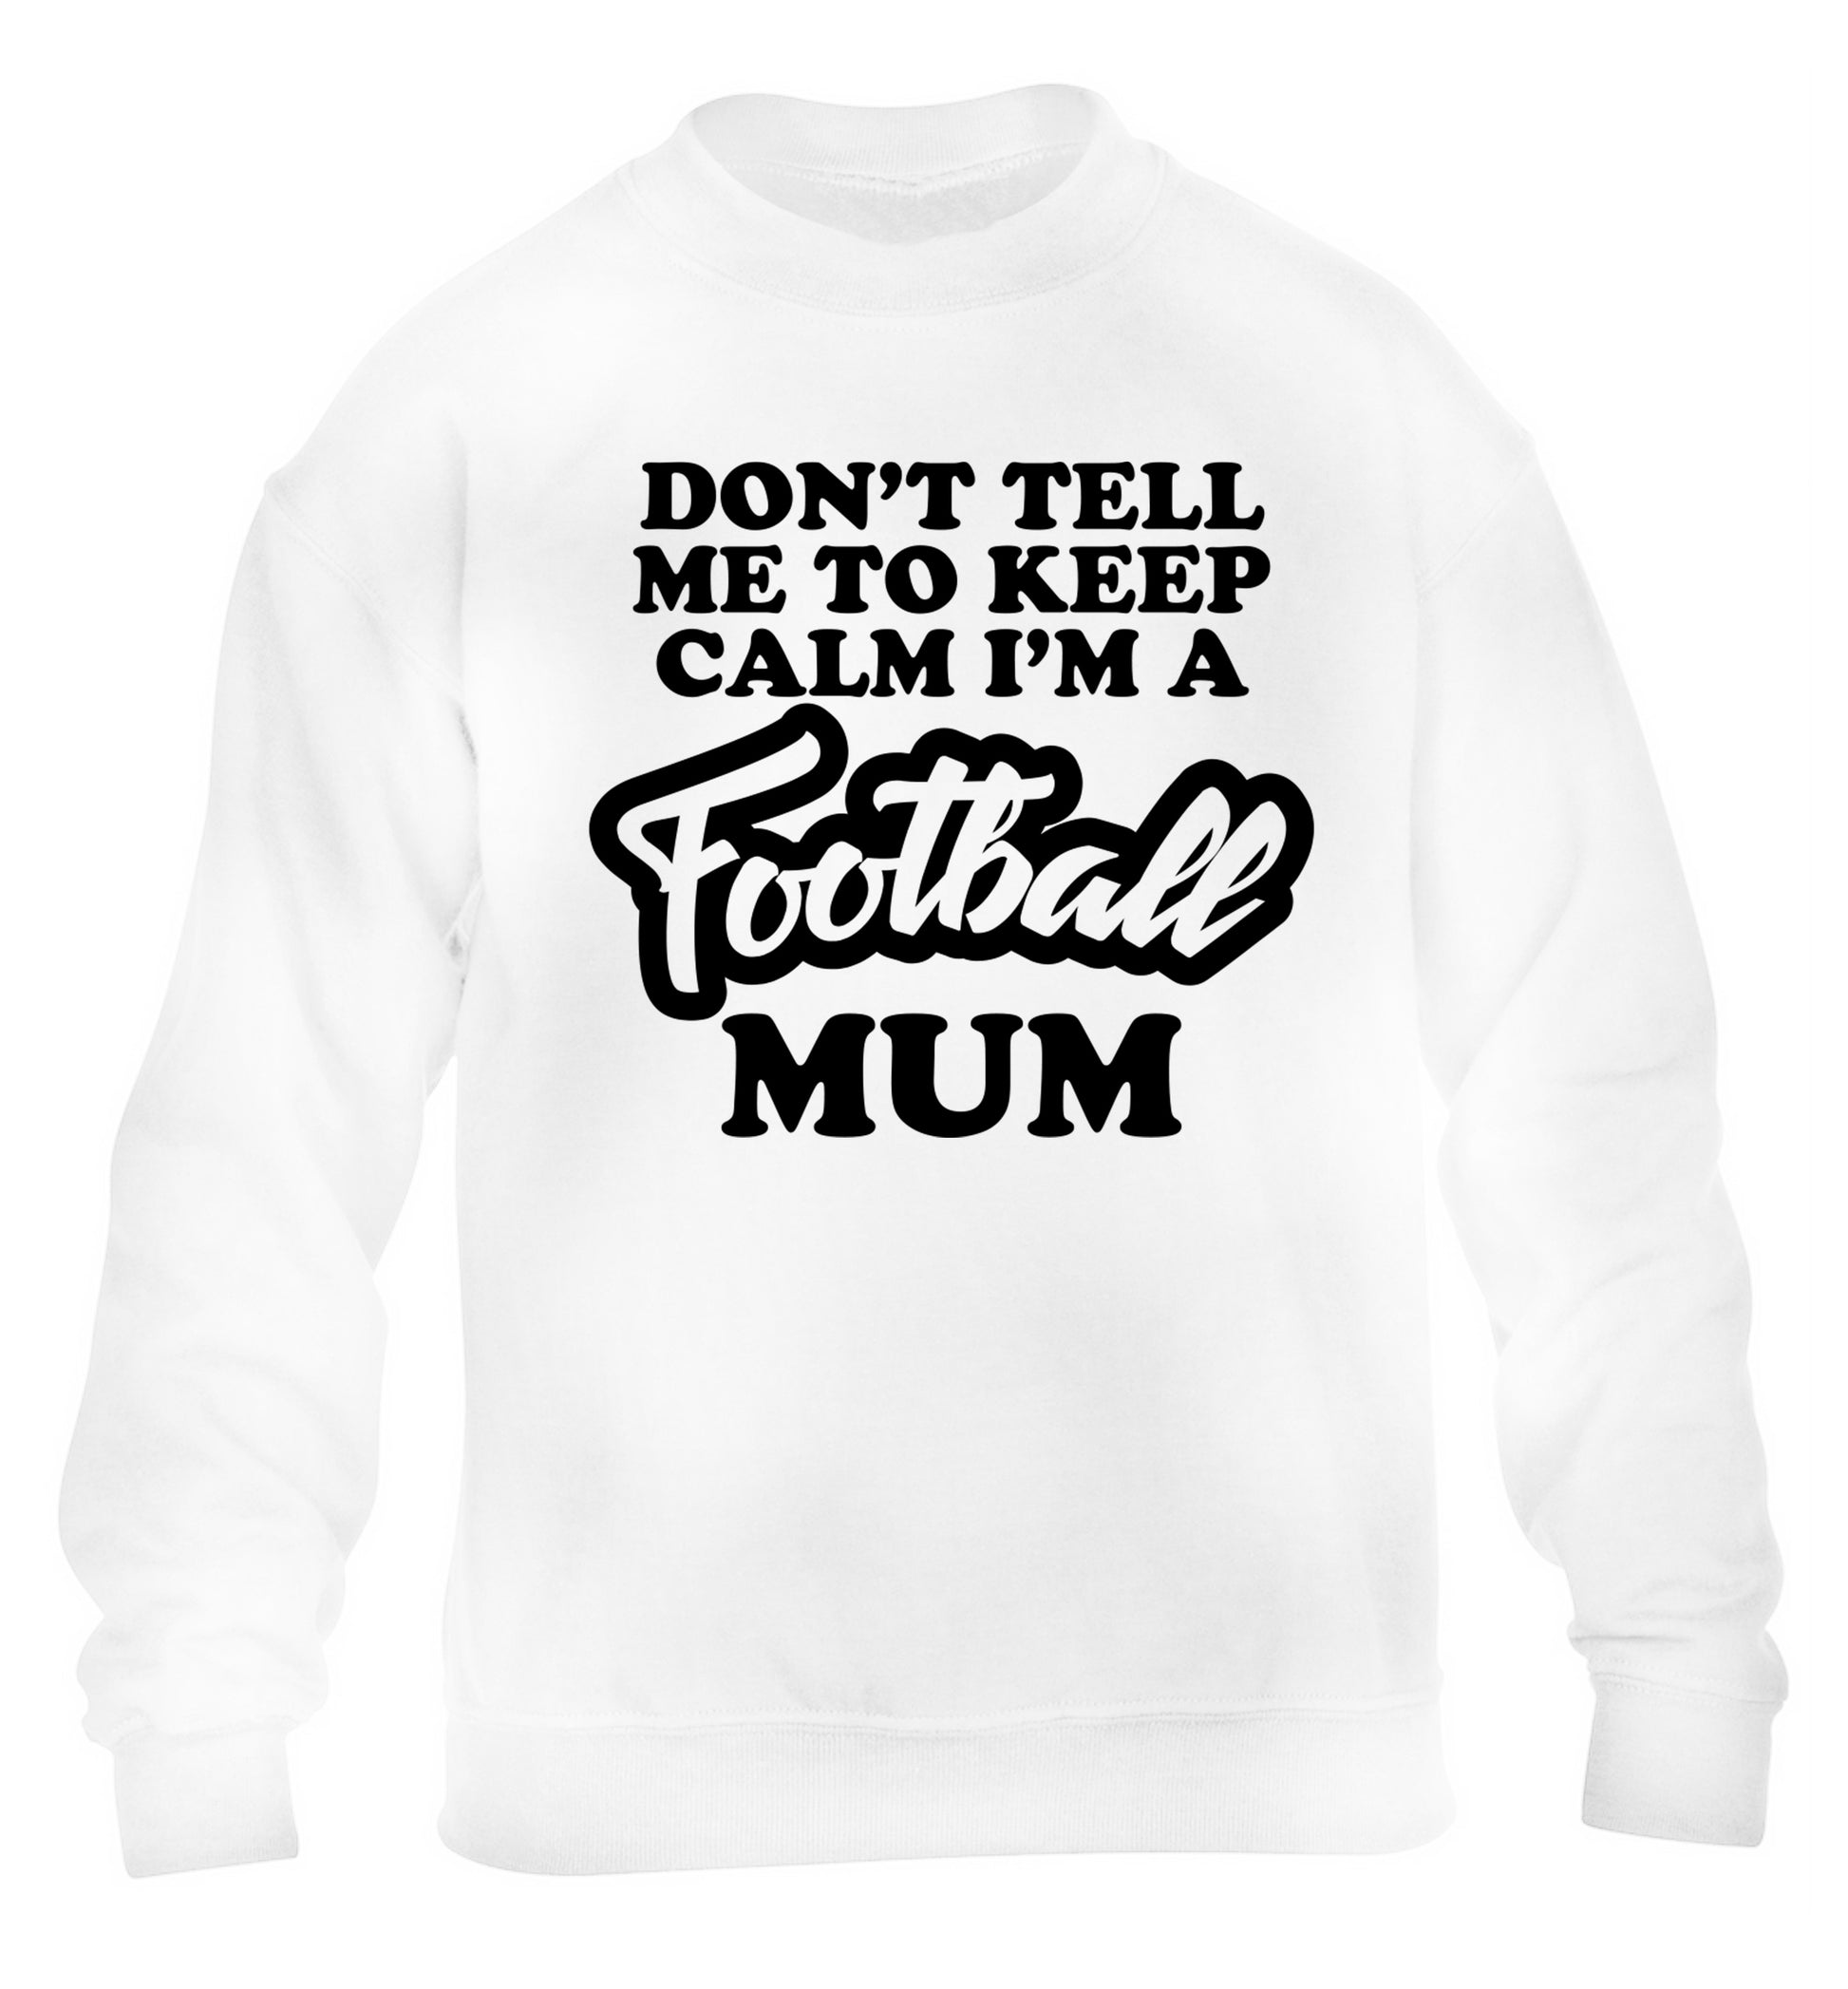 Don't tell me to keep calm I'm a football mum children's white sweater 12-14 Years